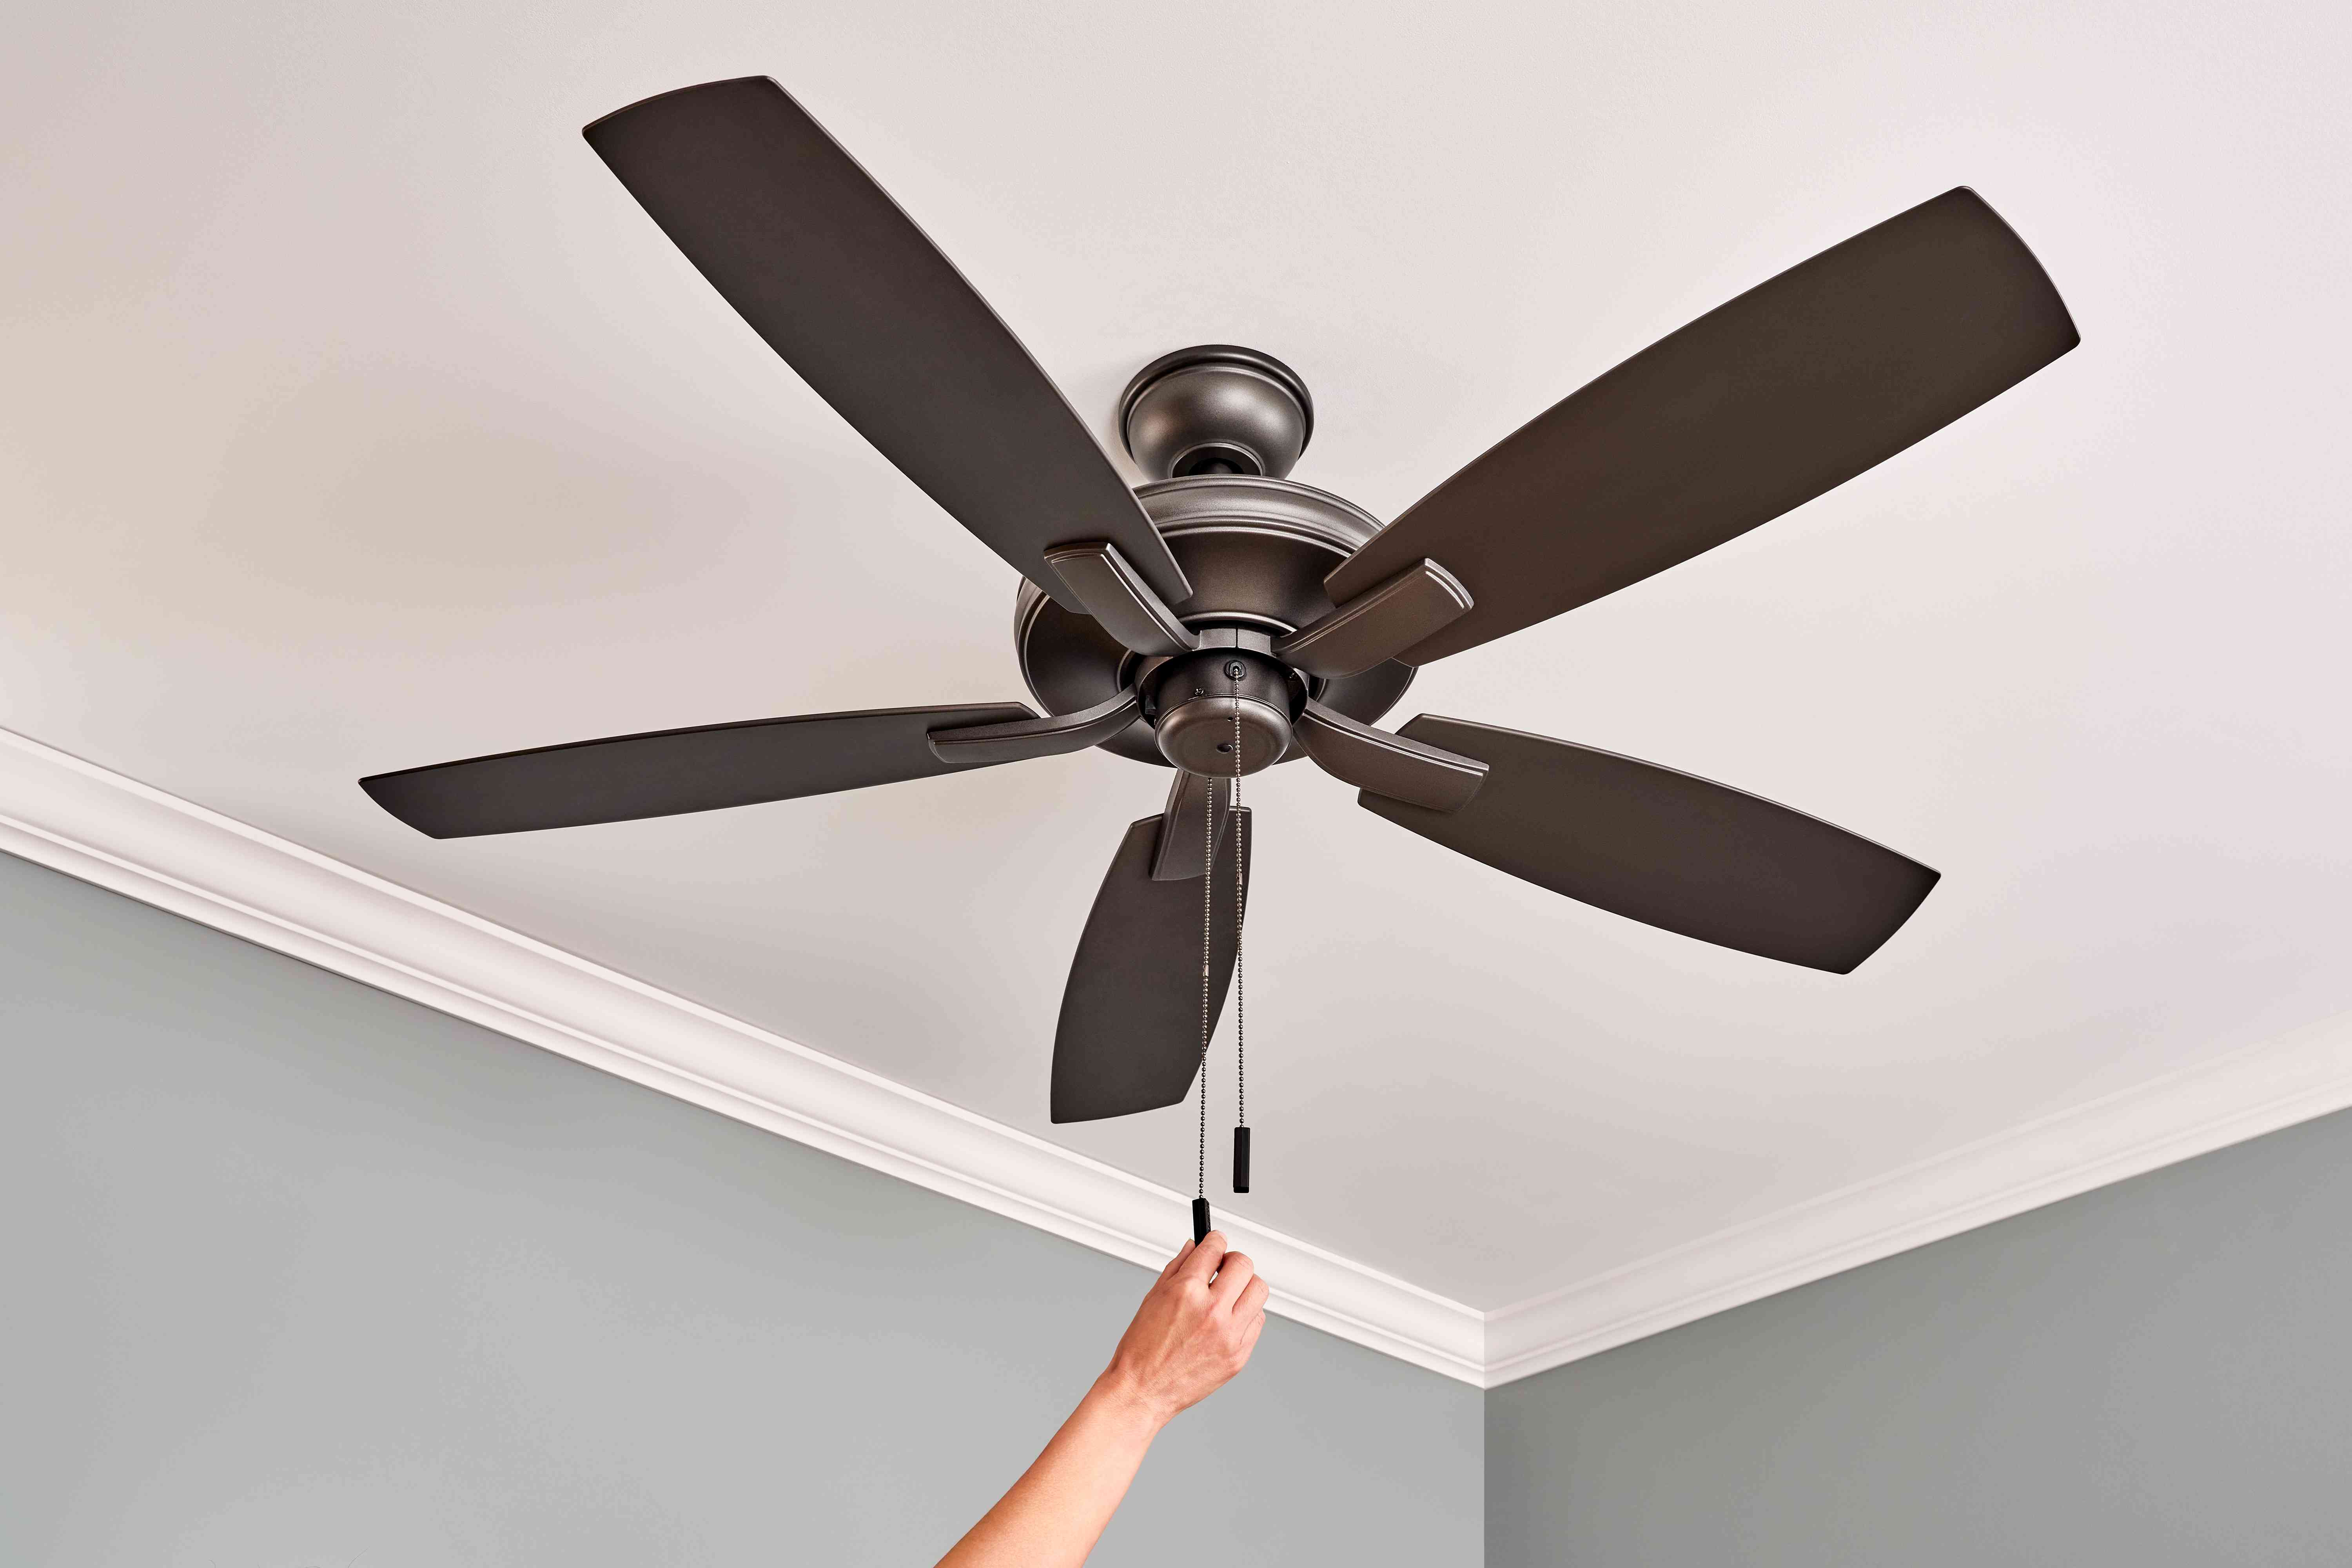 How To Turn On A Ceiling Fan Without Chain